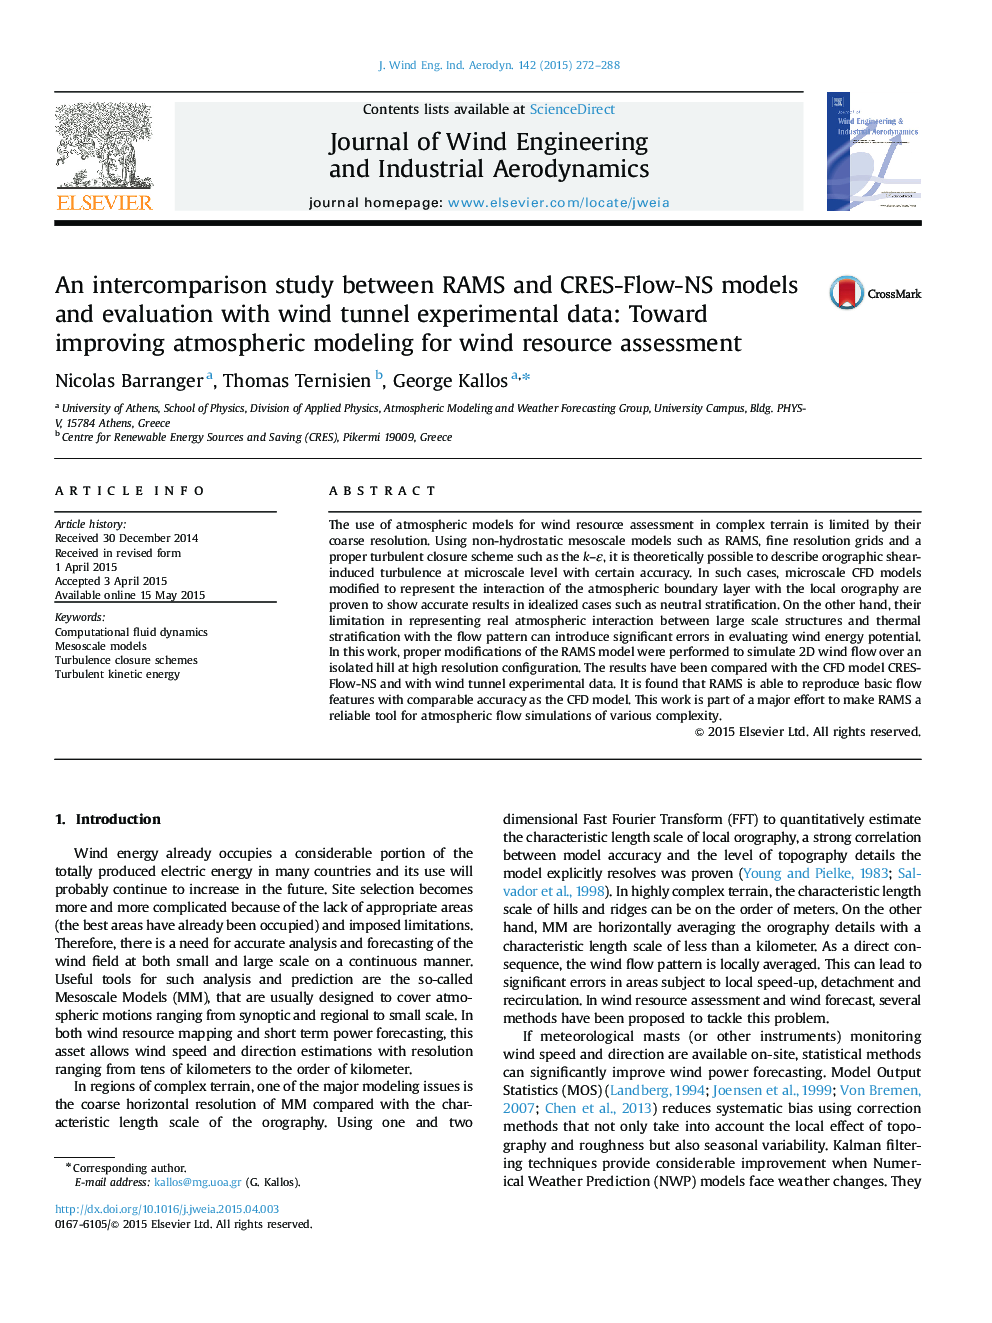 An intercomparison study between RAMS and CRES-Flow-NS models and evaluation with wind tunnel experimental data: Toward improving atmospheric modeling for wind resource assessment